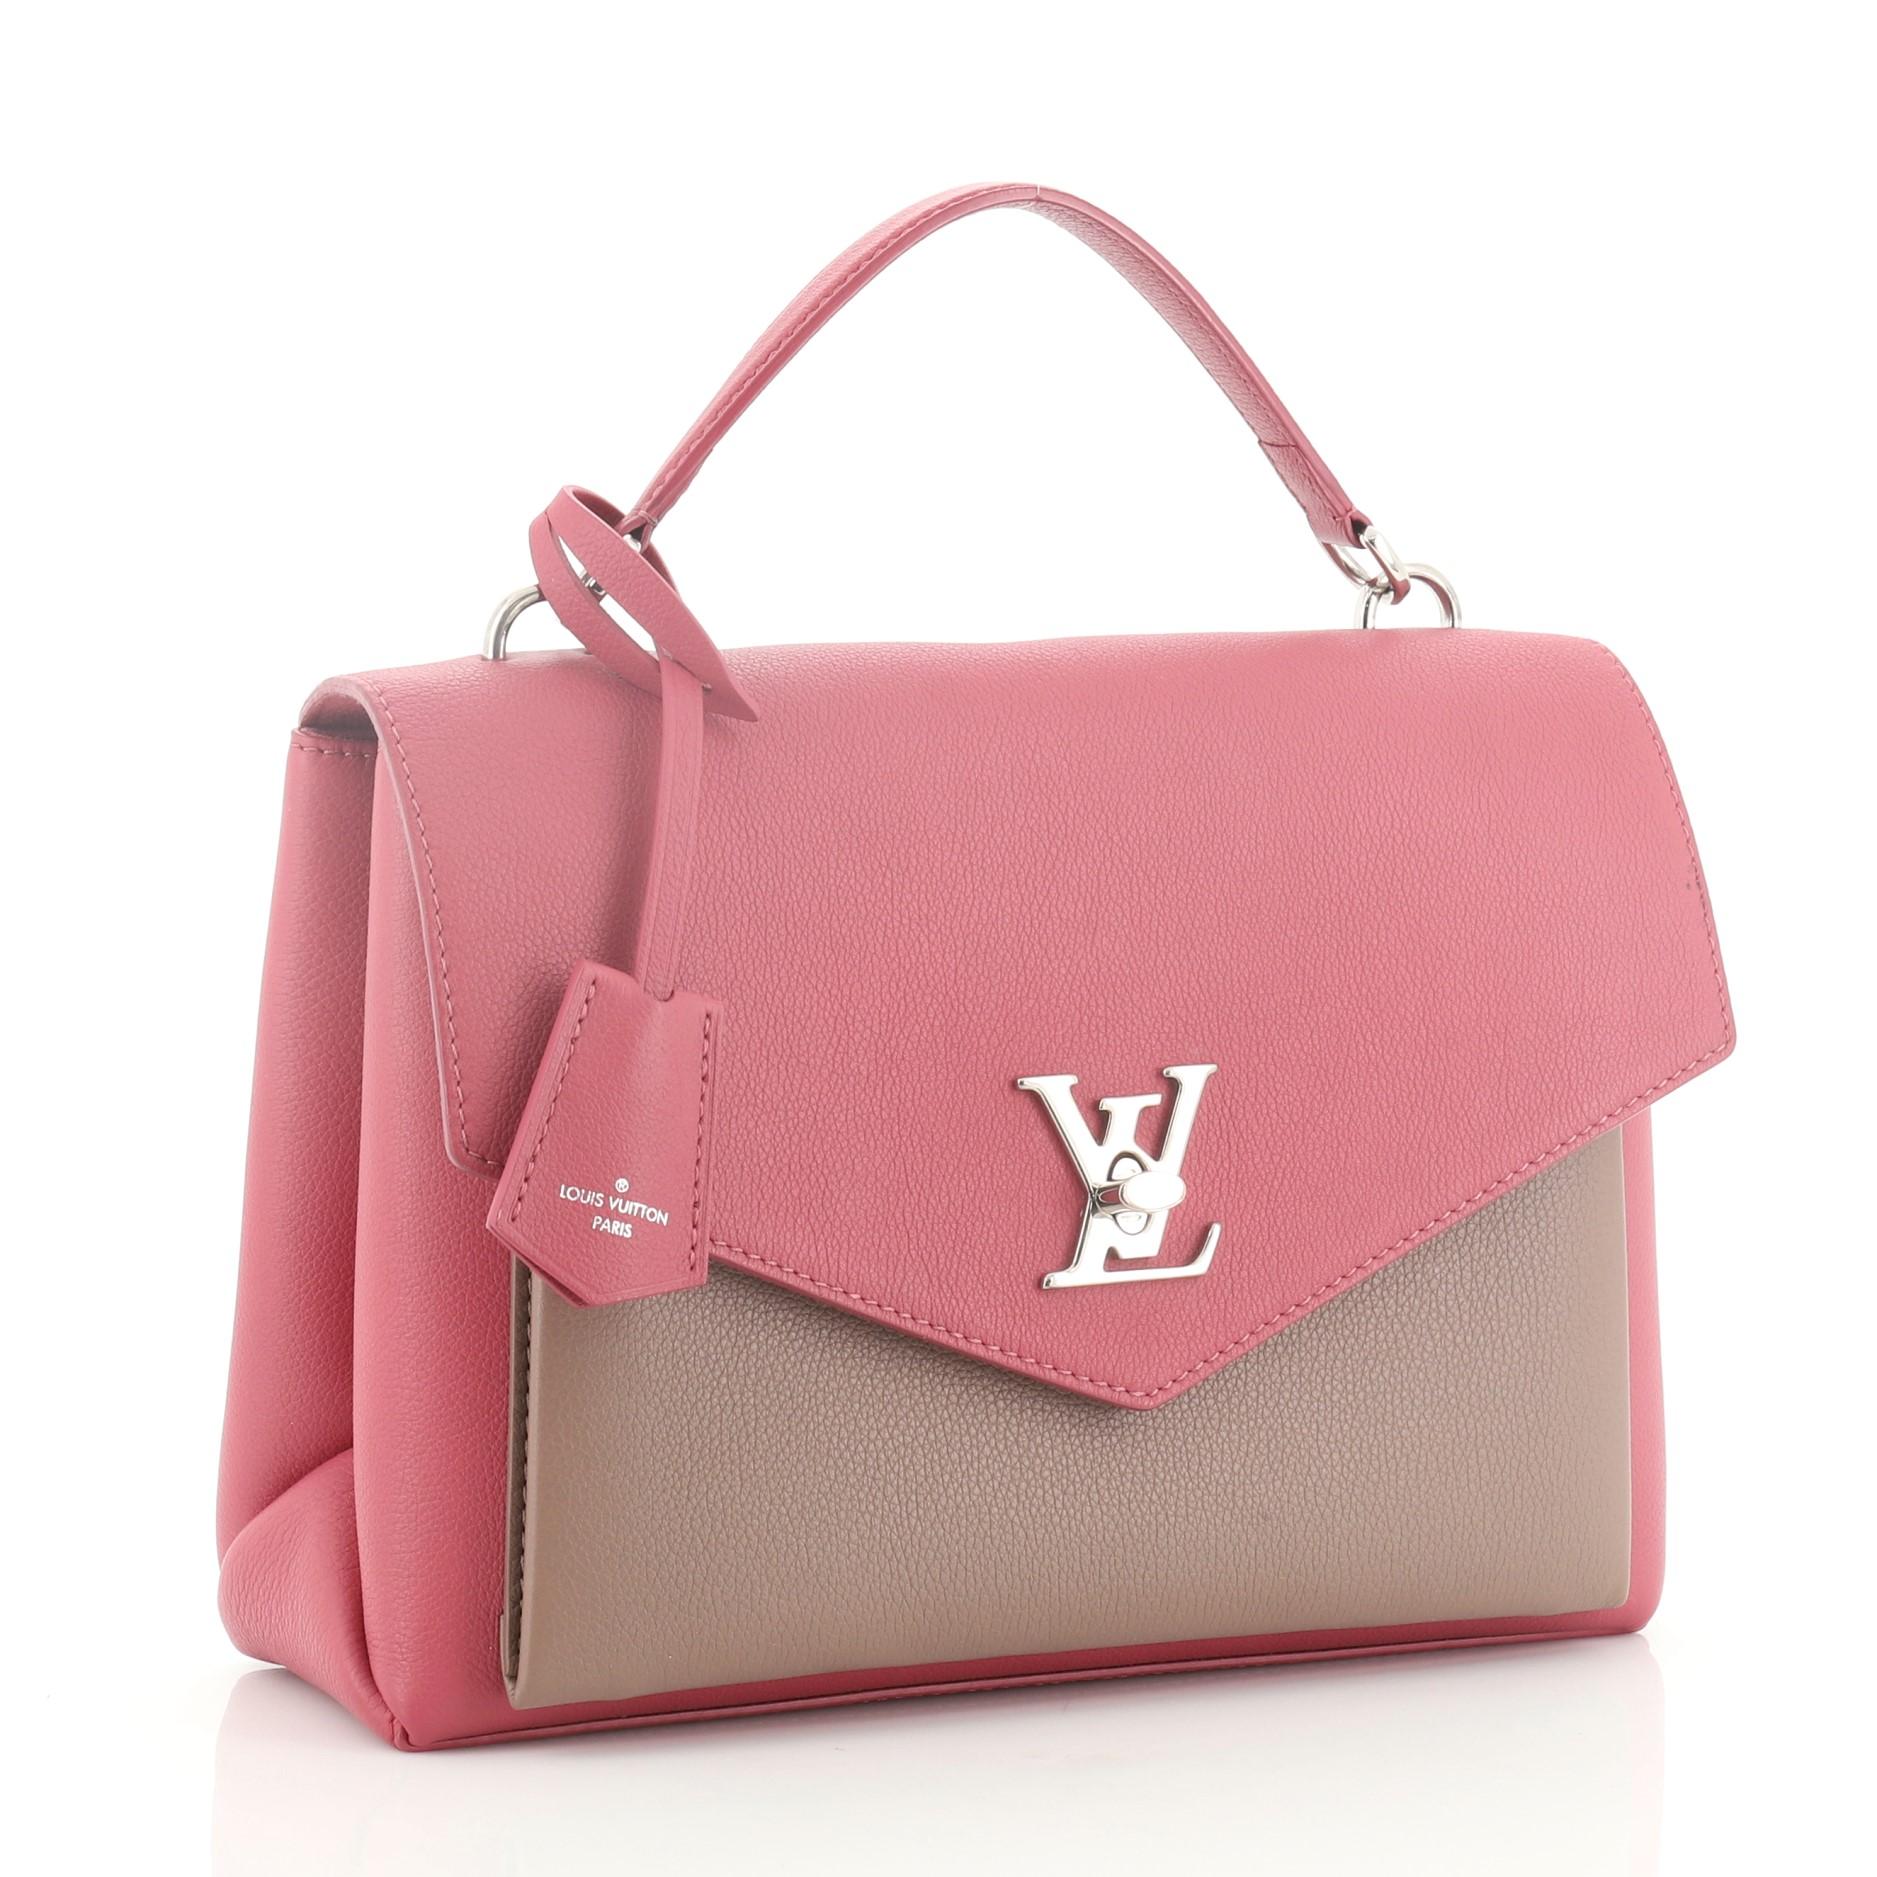 This Louis Vuitton Mylockme Handbag Leather, crafted in pink and neutral leather, features a leather top handle, exterior back zip pocket, and silver-tone hardware. Its LV twist-lock closure opens to a pink microfiber interior divided into two